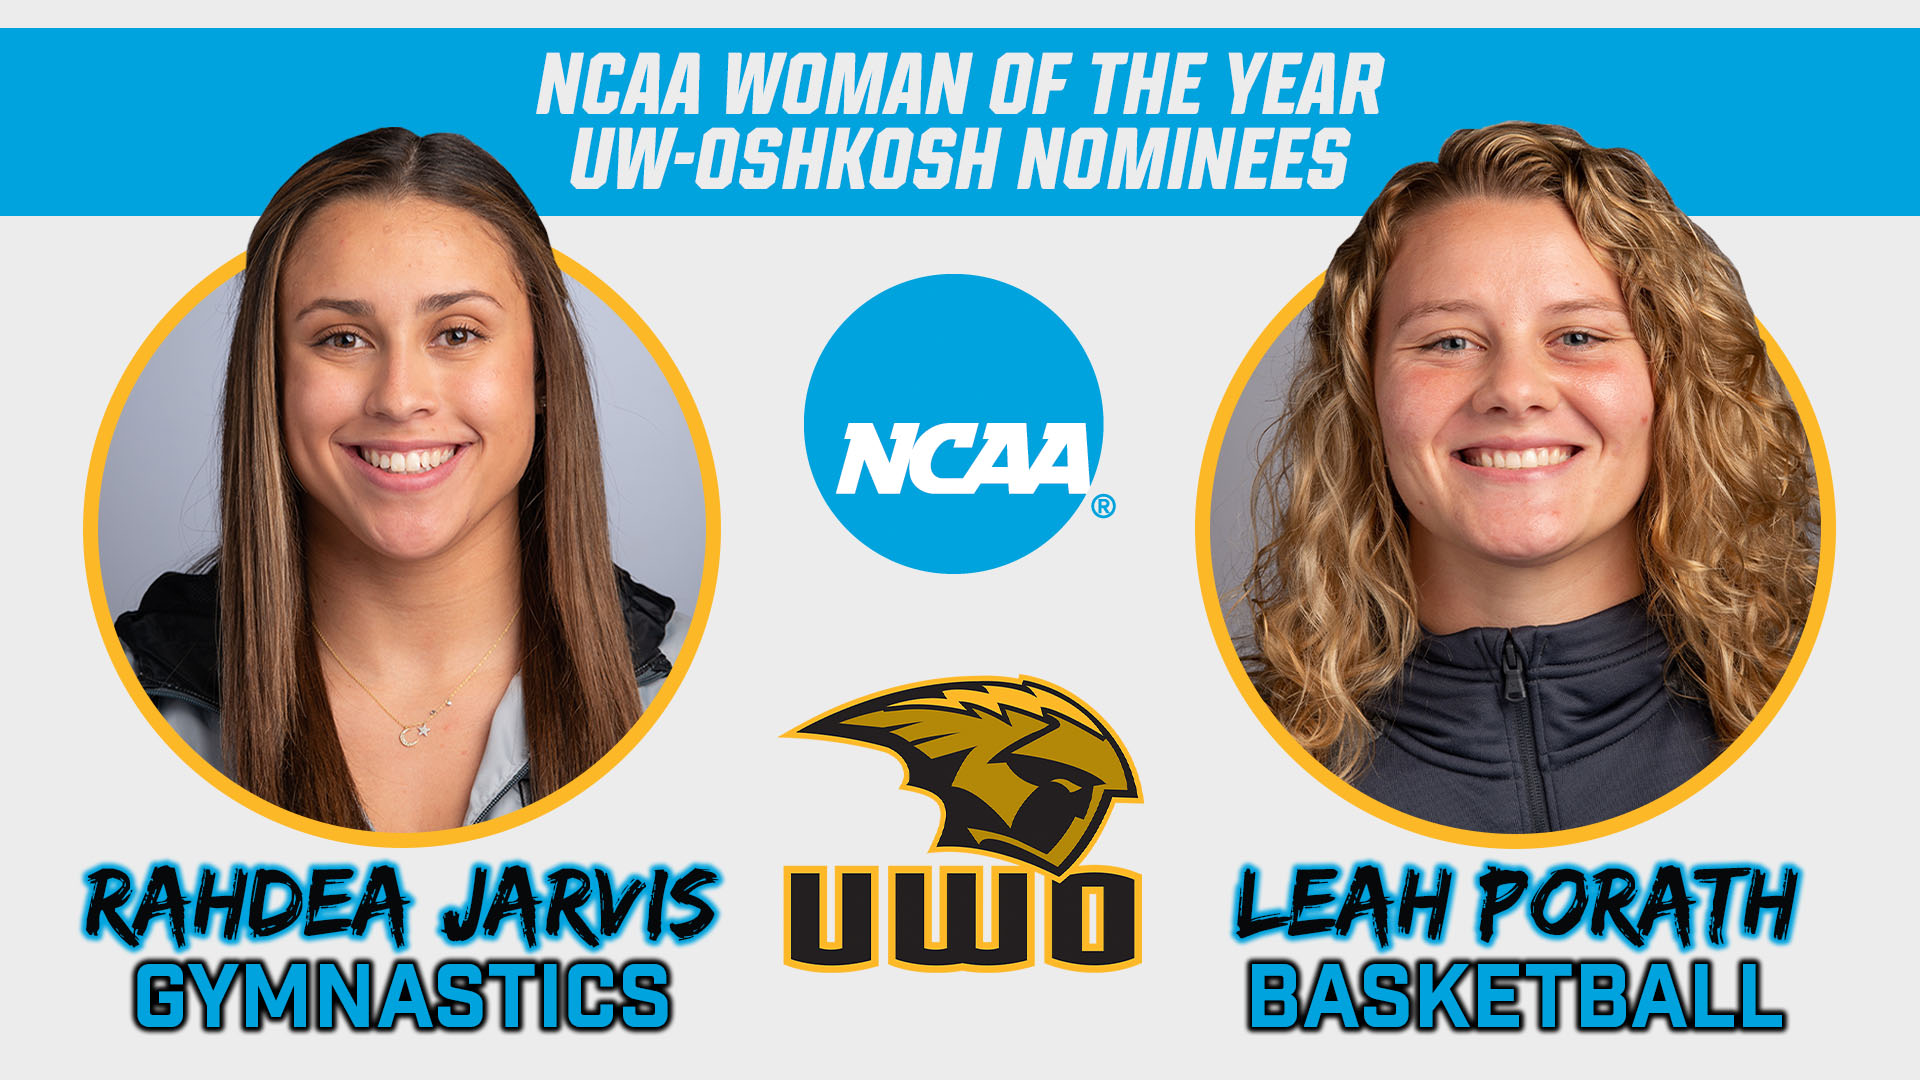 Jarvis, Porath Nominated For NCAA Woman Of The Year Award